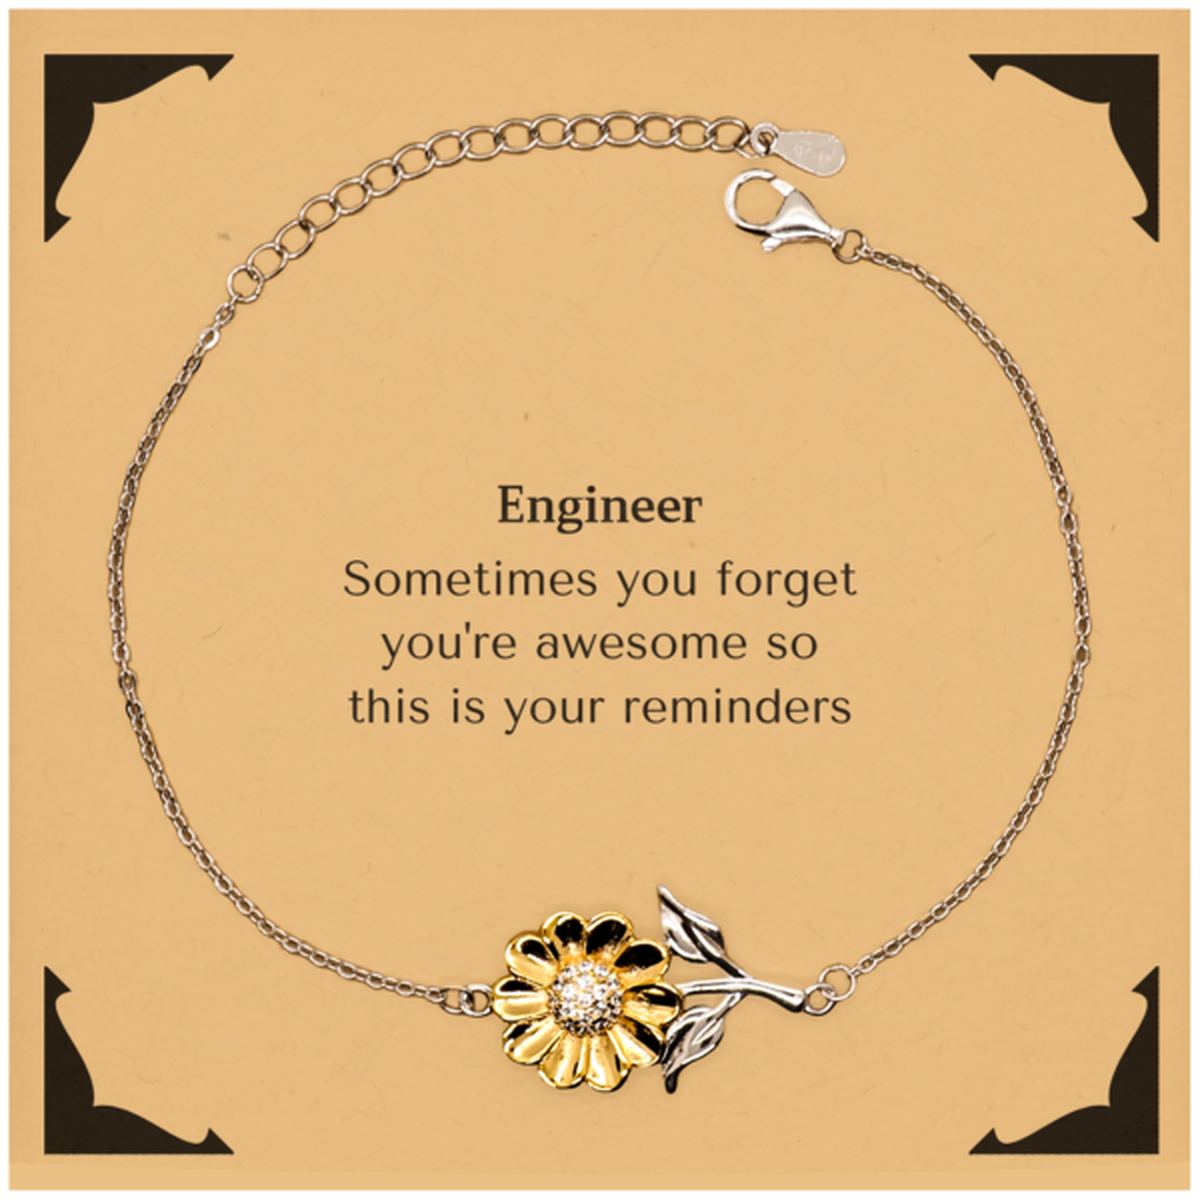 Sentimental Engineer Sunflower Bracelet, Engineer Sometimes you forget you're awesome so this is your reminders, Graduation Christmas Birthday Gifts for Engineer, Men, Women, Coworkers